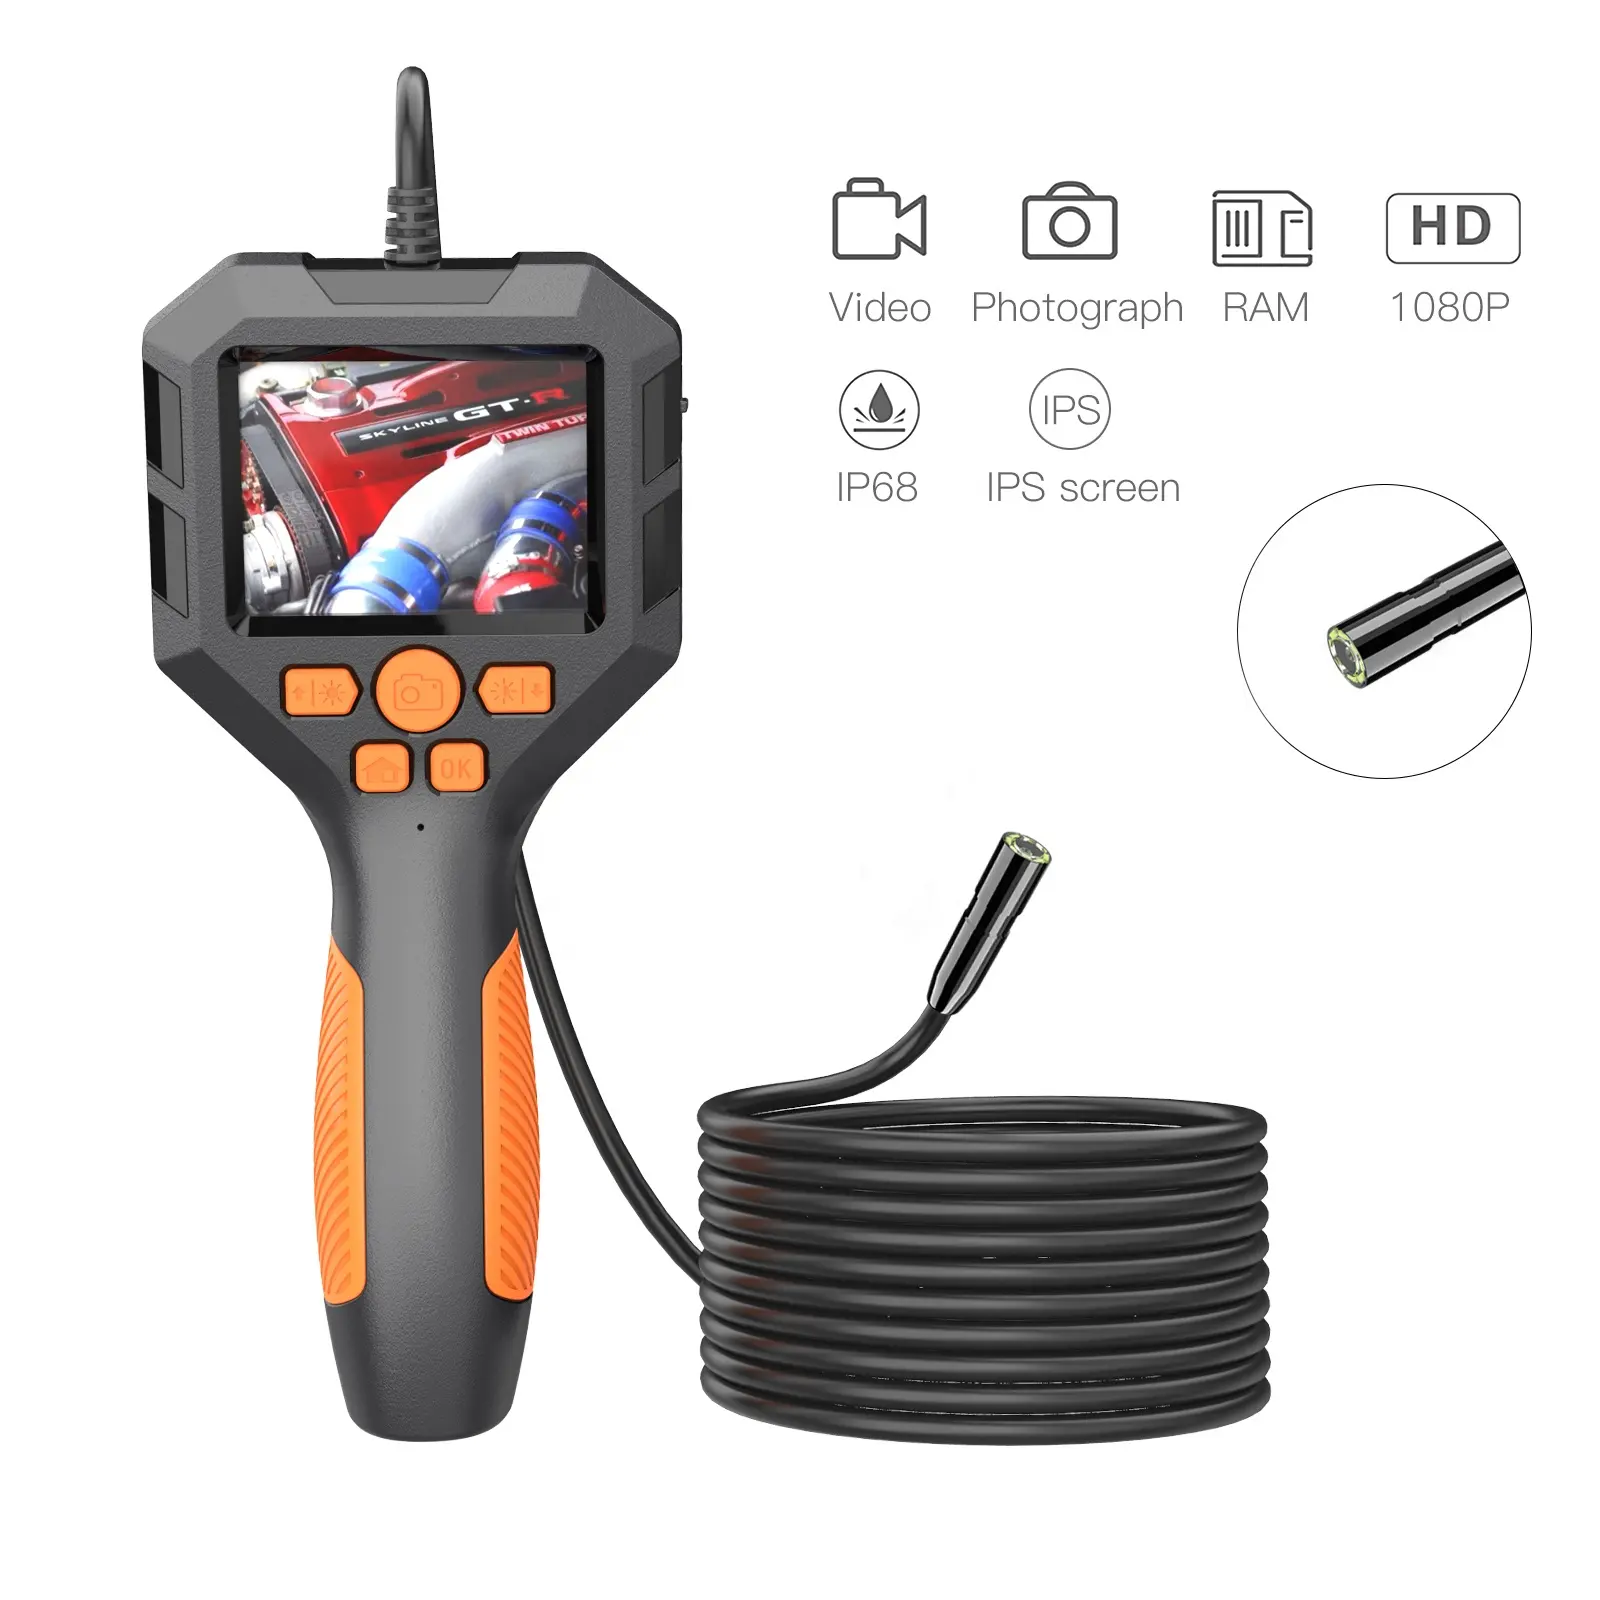 Portable Handheld Industrial Inspection Borescope Endoscope Camera P10 1080P 2.8 Inch Screen Hand Hold Endoscope